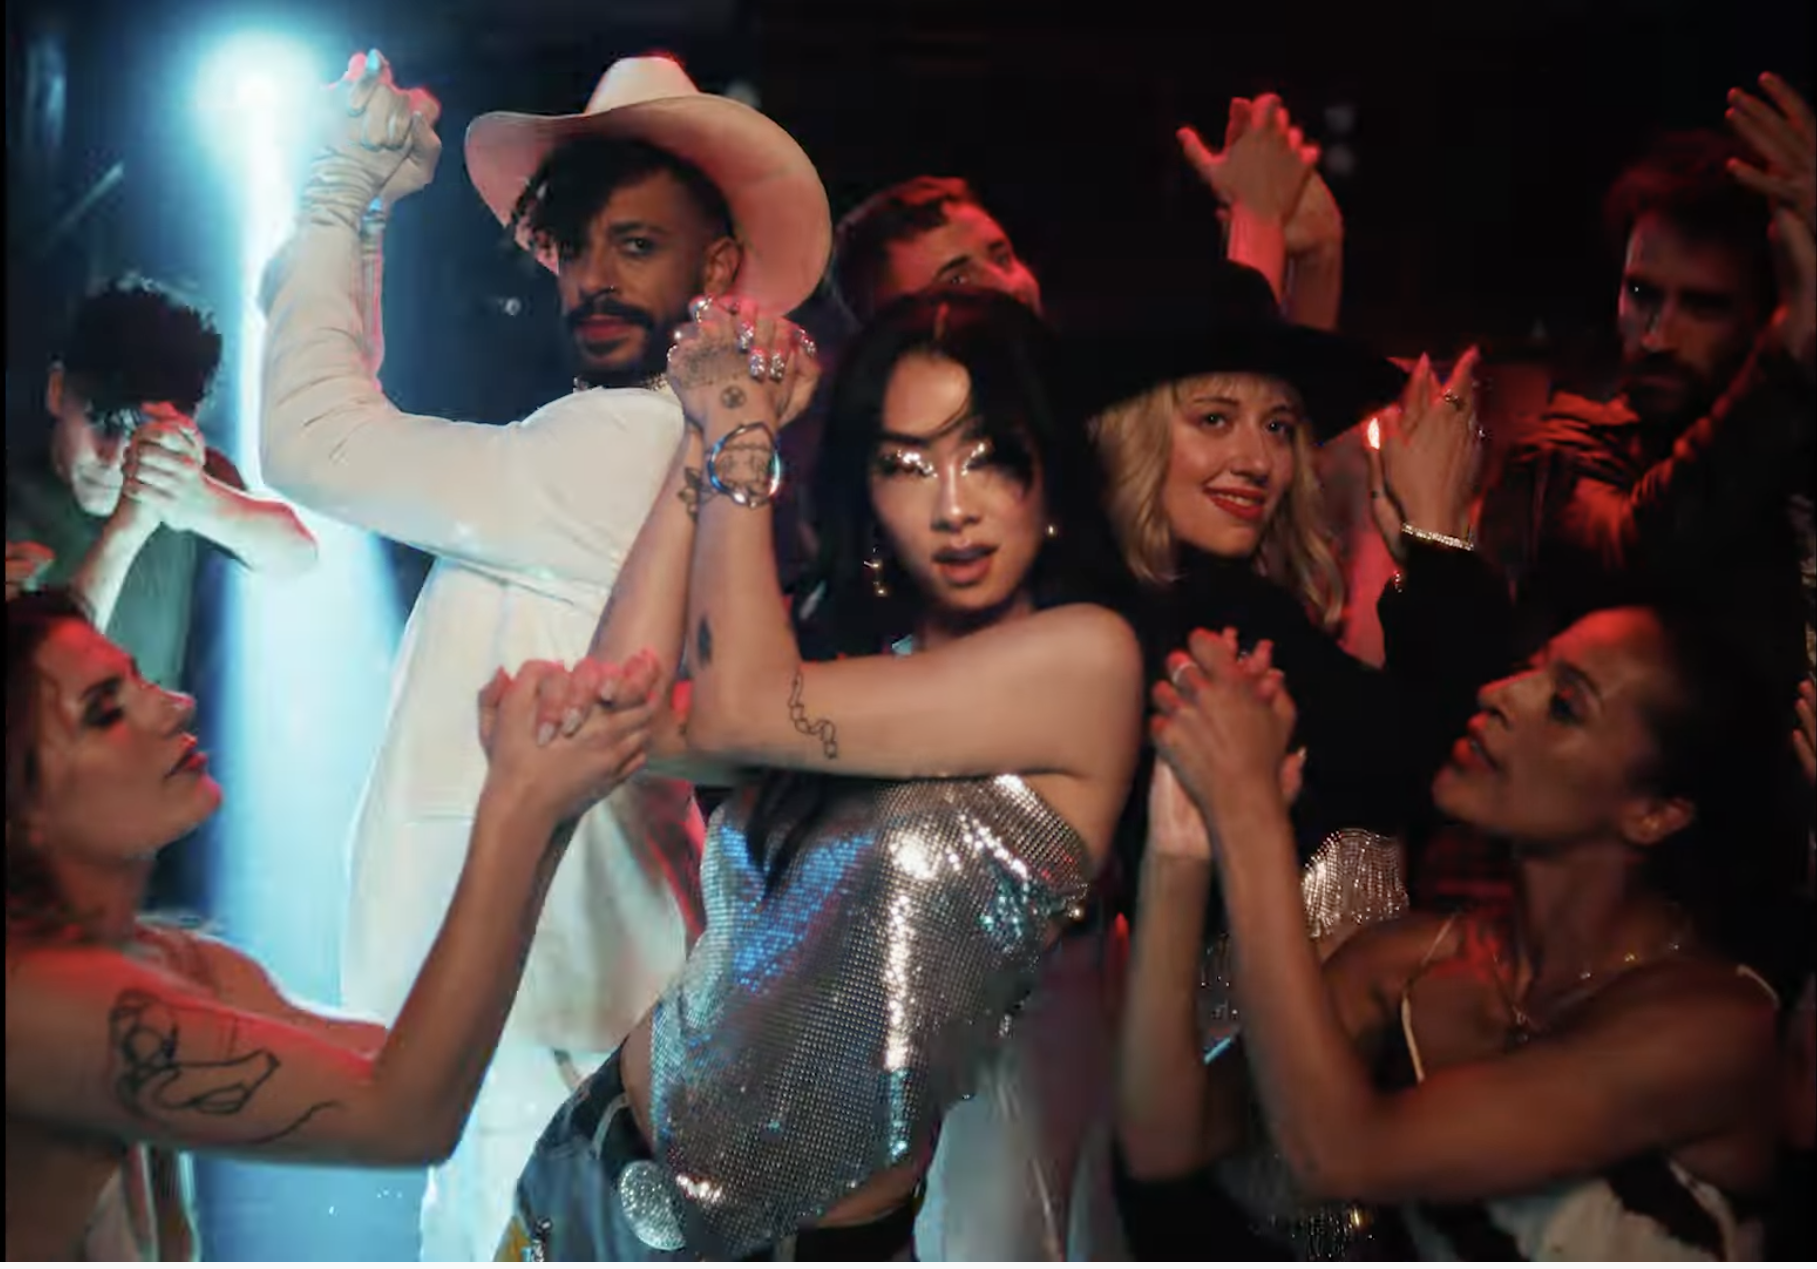 Screencap from the end of the video to "This Hell," an ensemble shot centering Rina Sawayama in a metallic strapless top with a triangular hem, her hands raised to her head at the end of a clap, wearing metallic eye makeup that echoes the top, looking fierce & joyful.